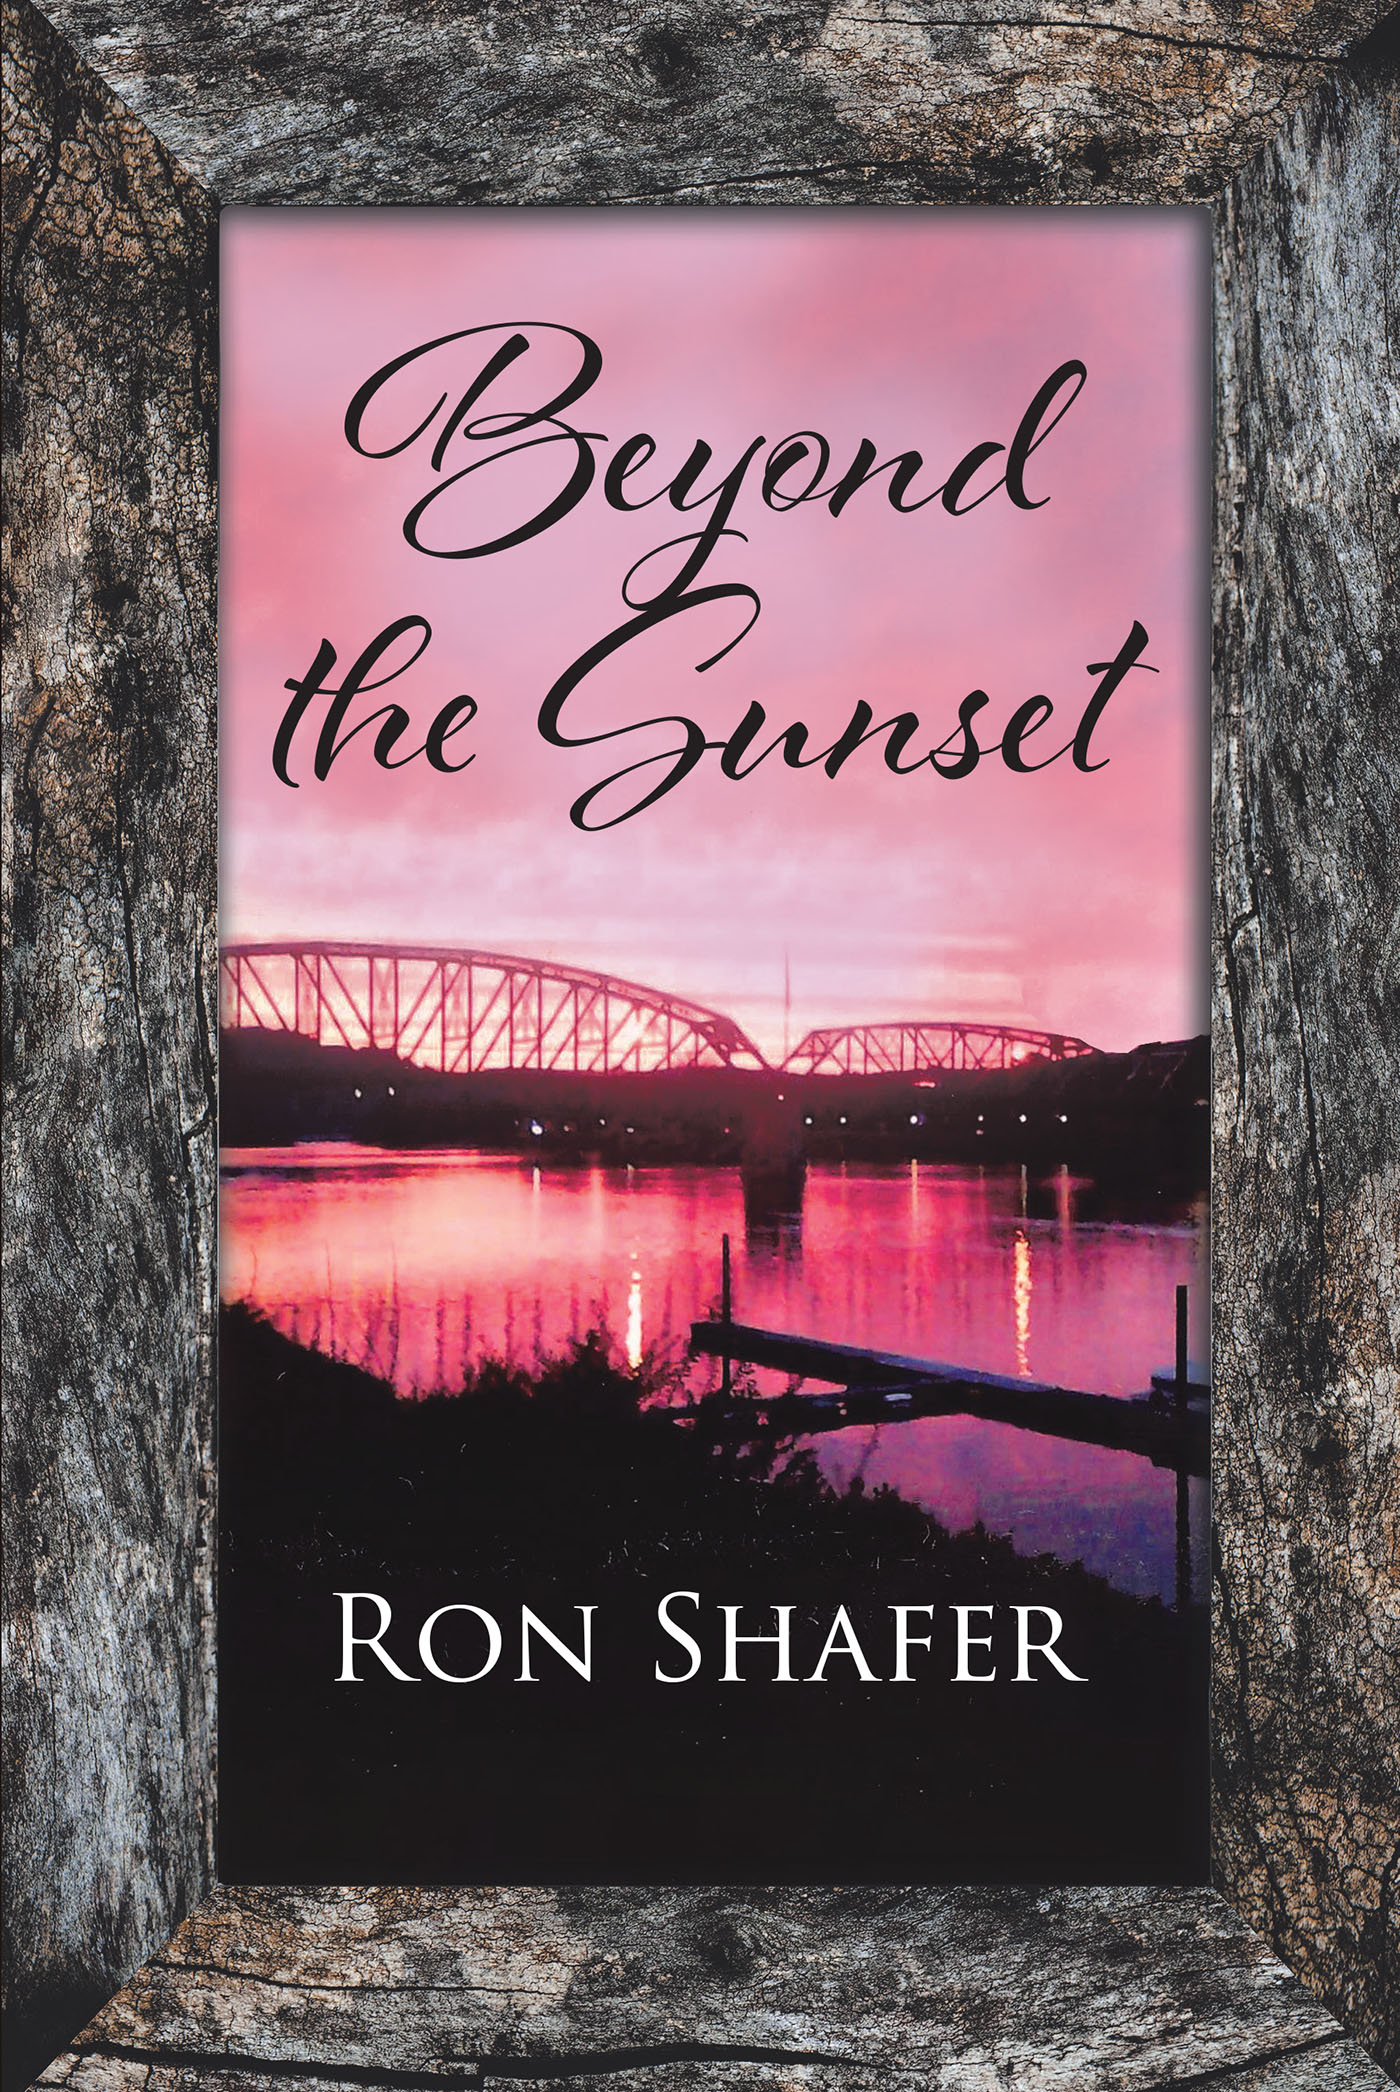 Ron Shafer’s Newly Released "Beyond the Sunset" is a Compelling Blend of Modern Romance and Unexpected Twists of Fate